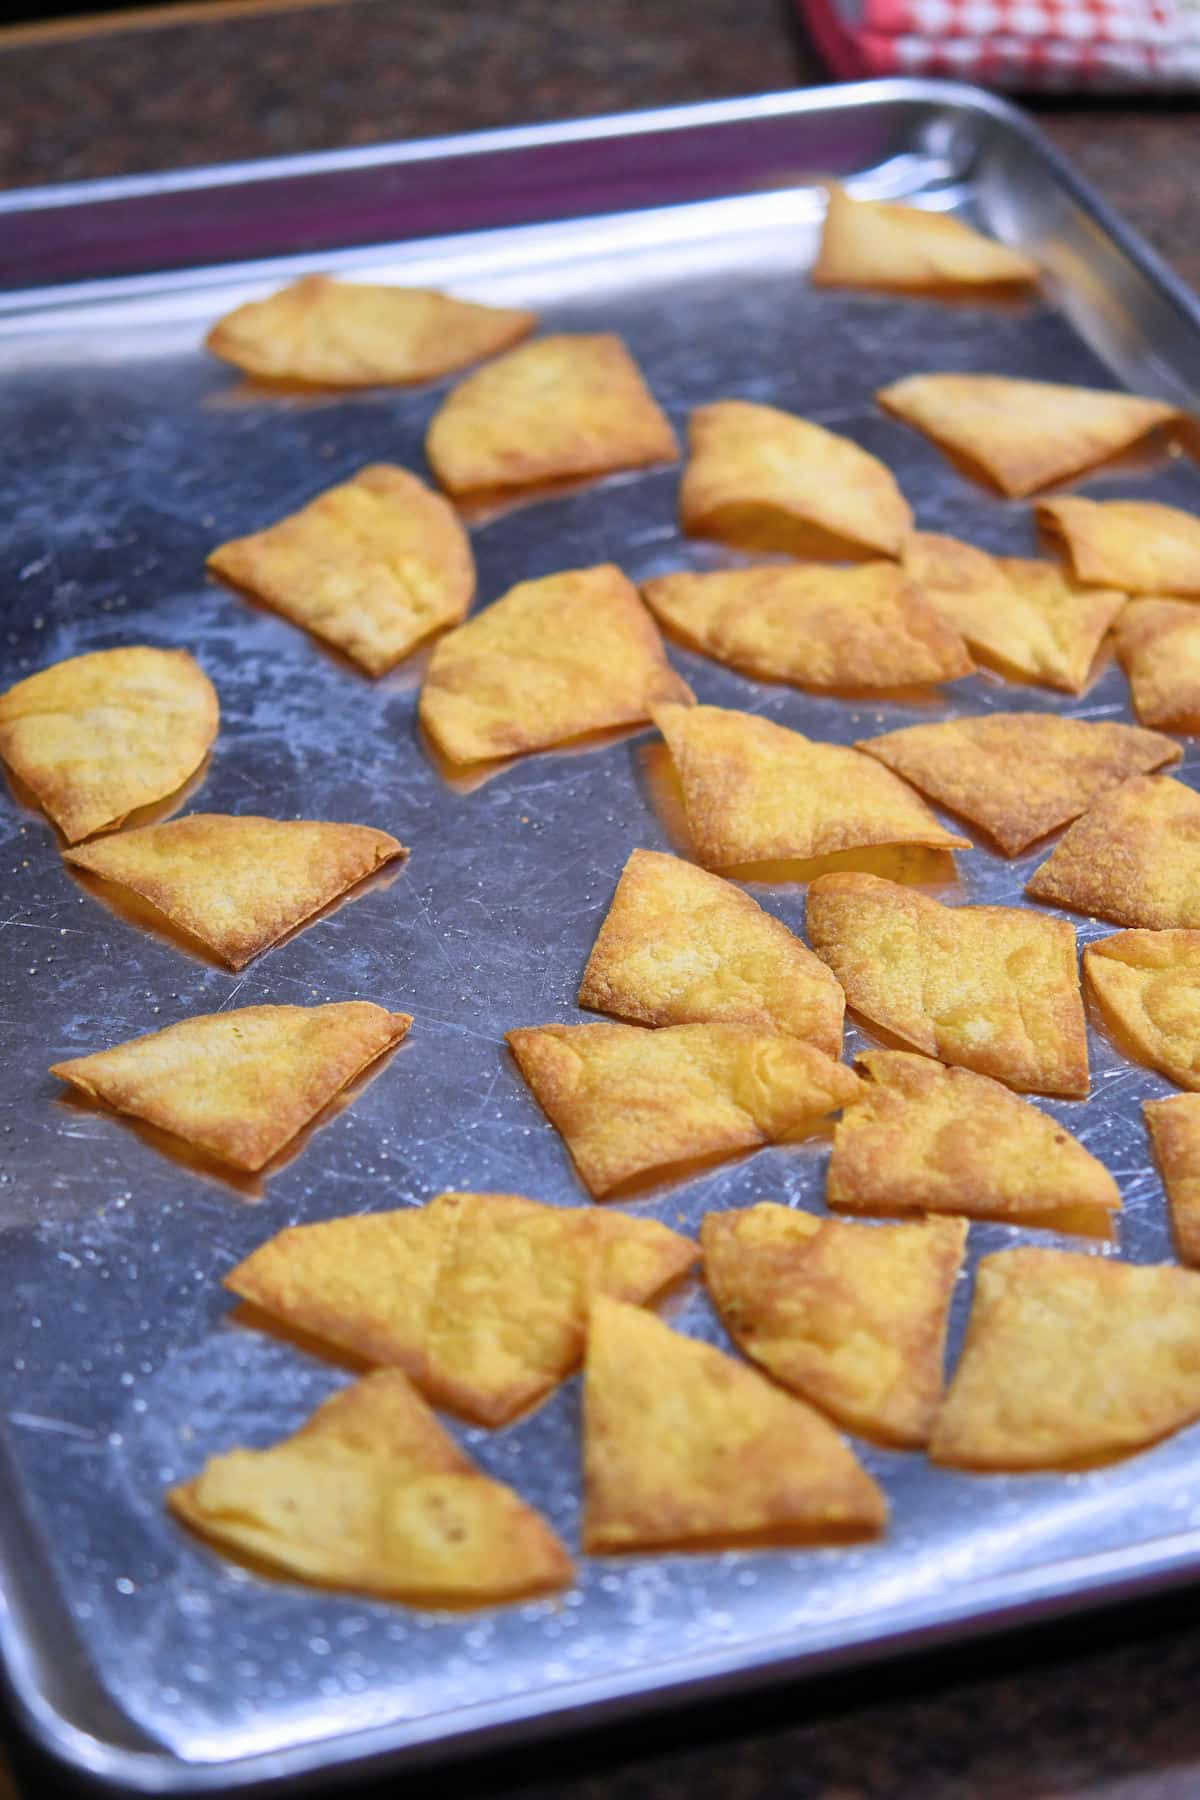 Tortilla chips, freshly baked from the oven